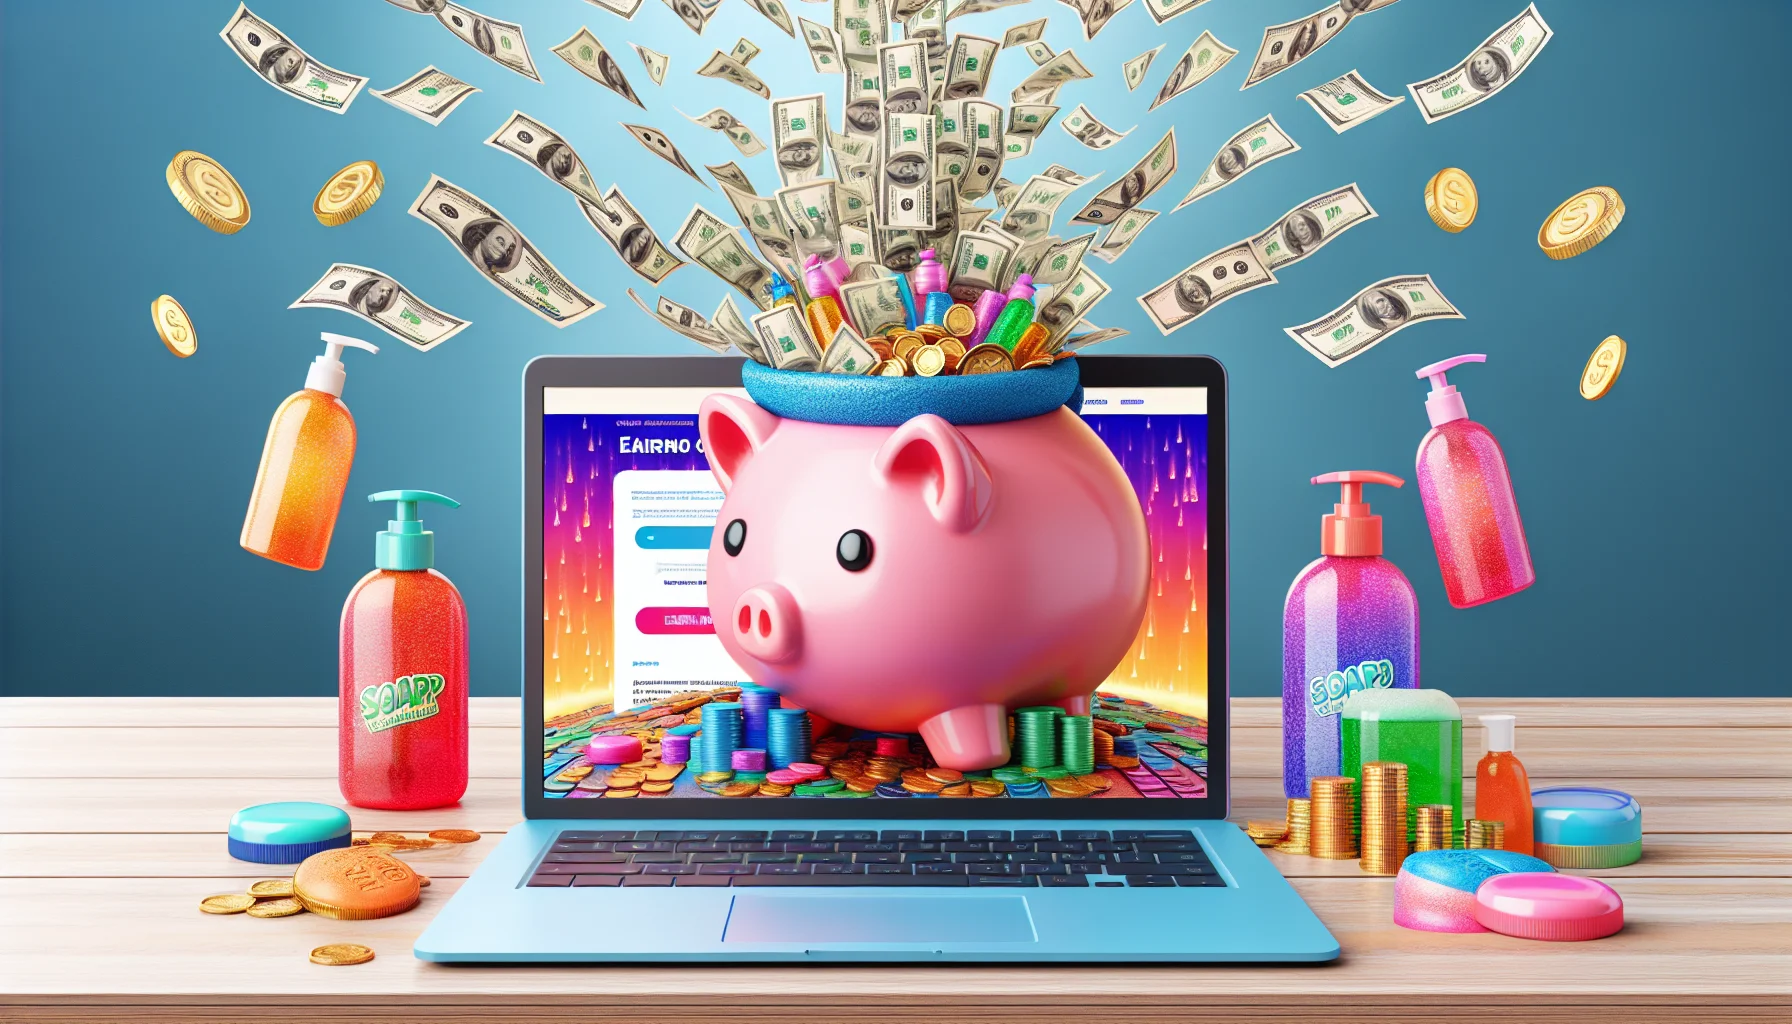 A funny and intriguing image that represents the concept of generating income online through an unidentified body care product's affiliate program. The scenario features a digitally rendered laptop screen displaying a vibrant website, enticing visitors with graphics of overflowing dollar bills, cash registers, and more. Next to the laptop, you see popular body care products like soaps and lotions, each with a clickable 'Earn Money Now!' bubble overlay. The entire setting is on a backdrop of a huge piggy bank with coins pouring out of it, symbolizing an easy flow of online income.